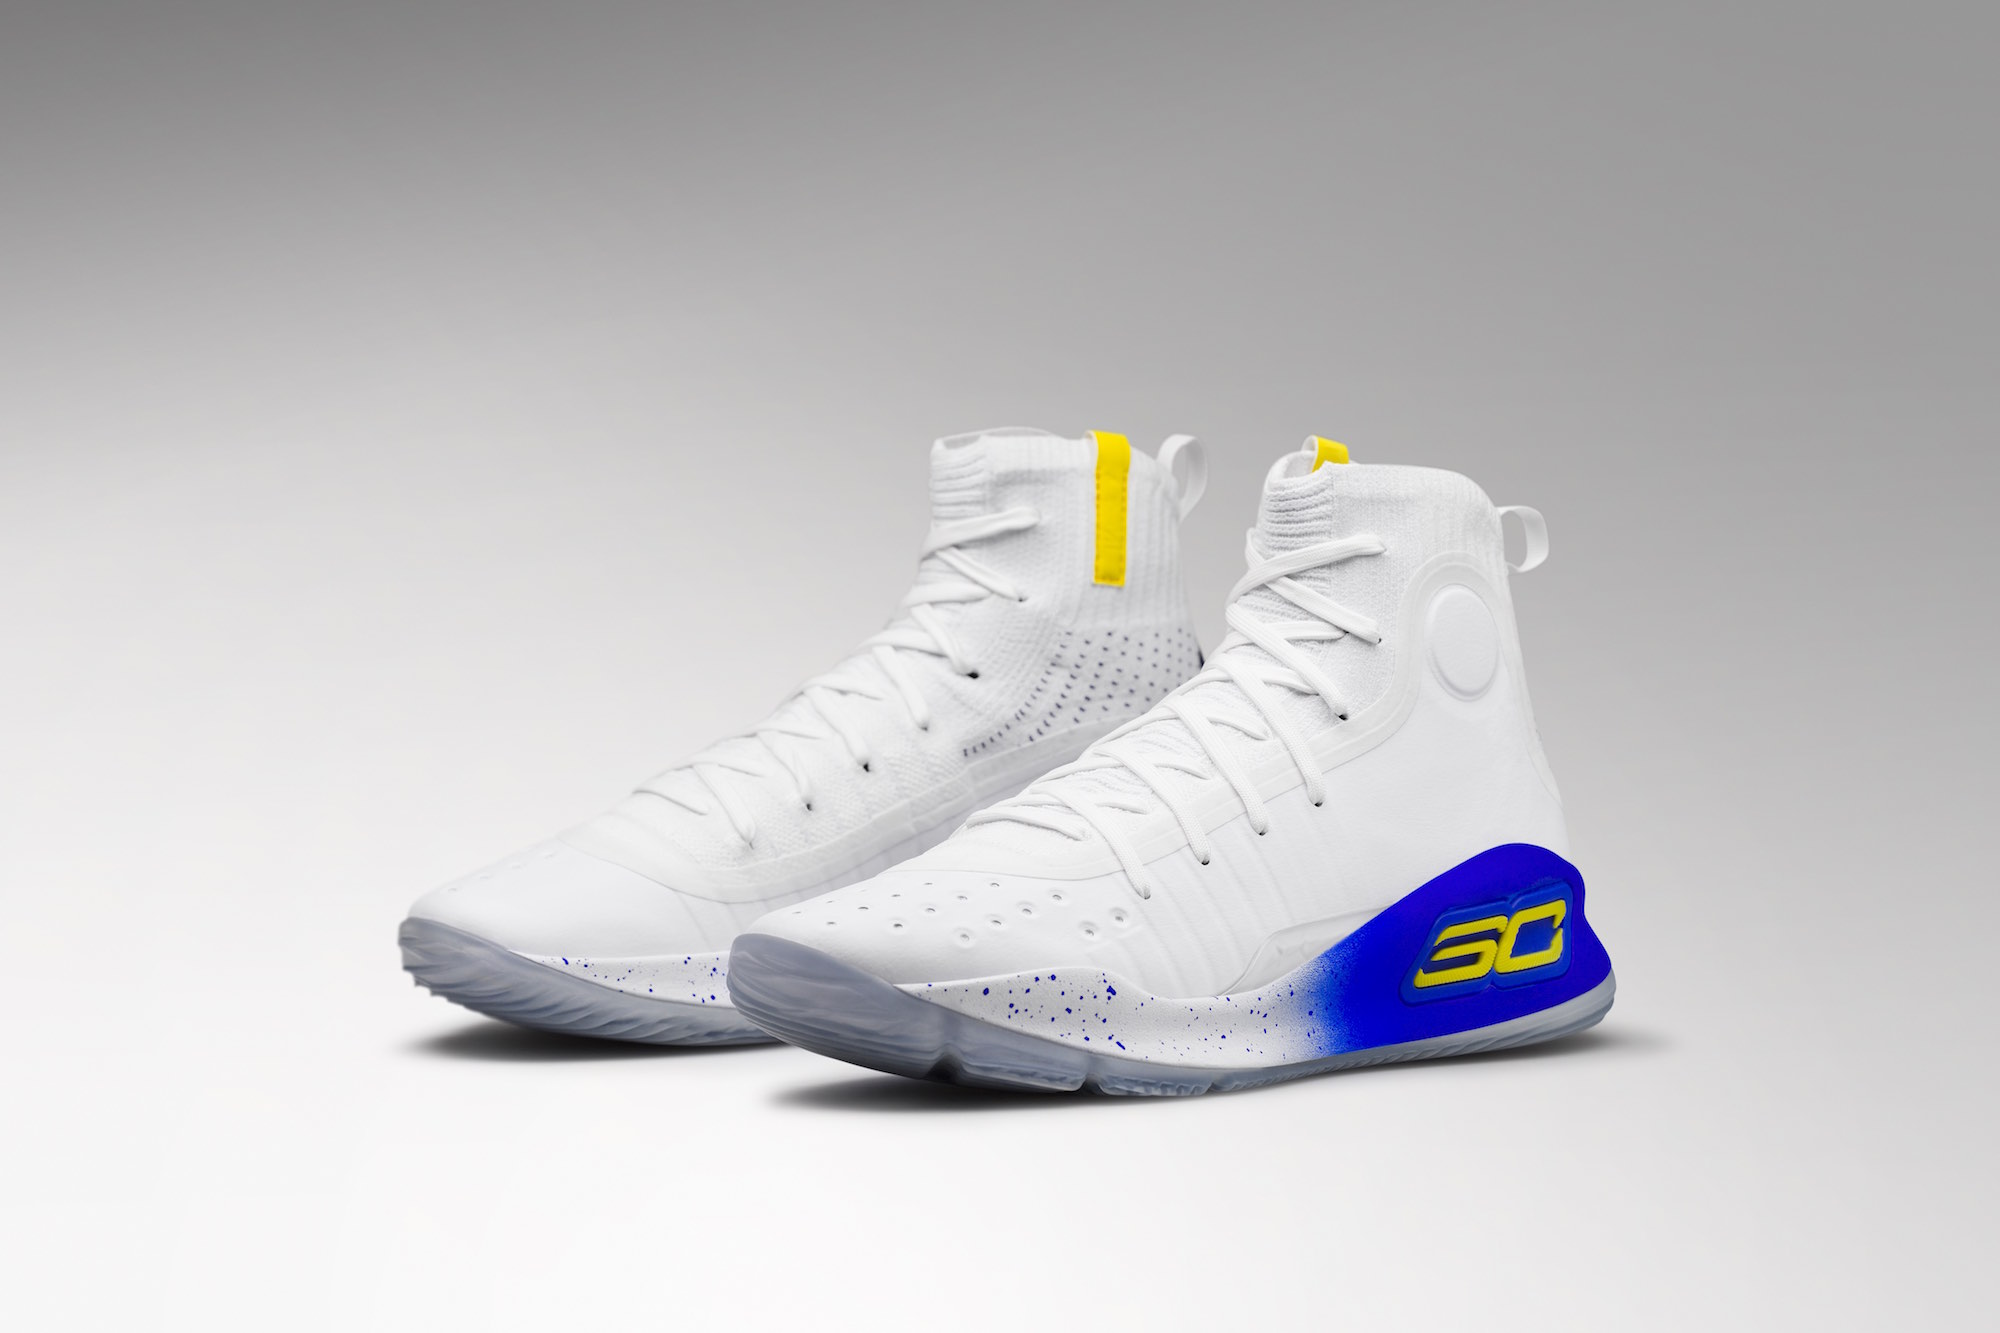 Under Armour Curry 4 More Dubs 11